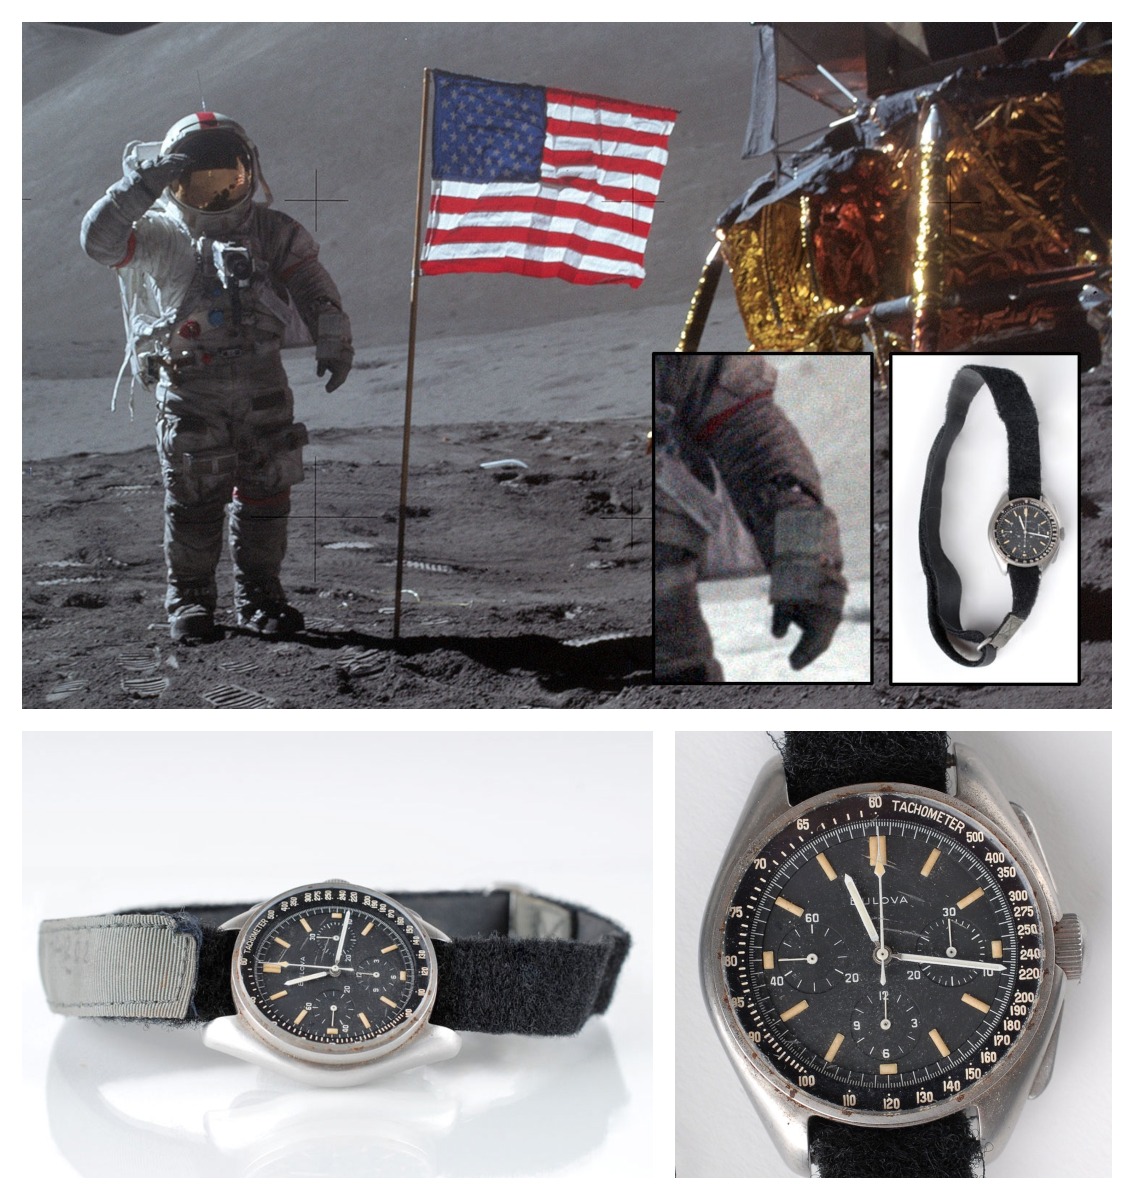 Scott wearing the Bulova chronograph while walking on the Moon and pictures of his watch sold for auction. Credits : NASA, RR Auctions.